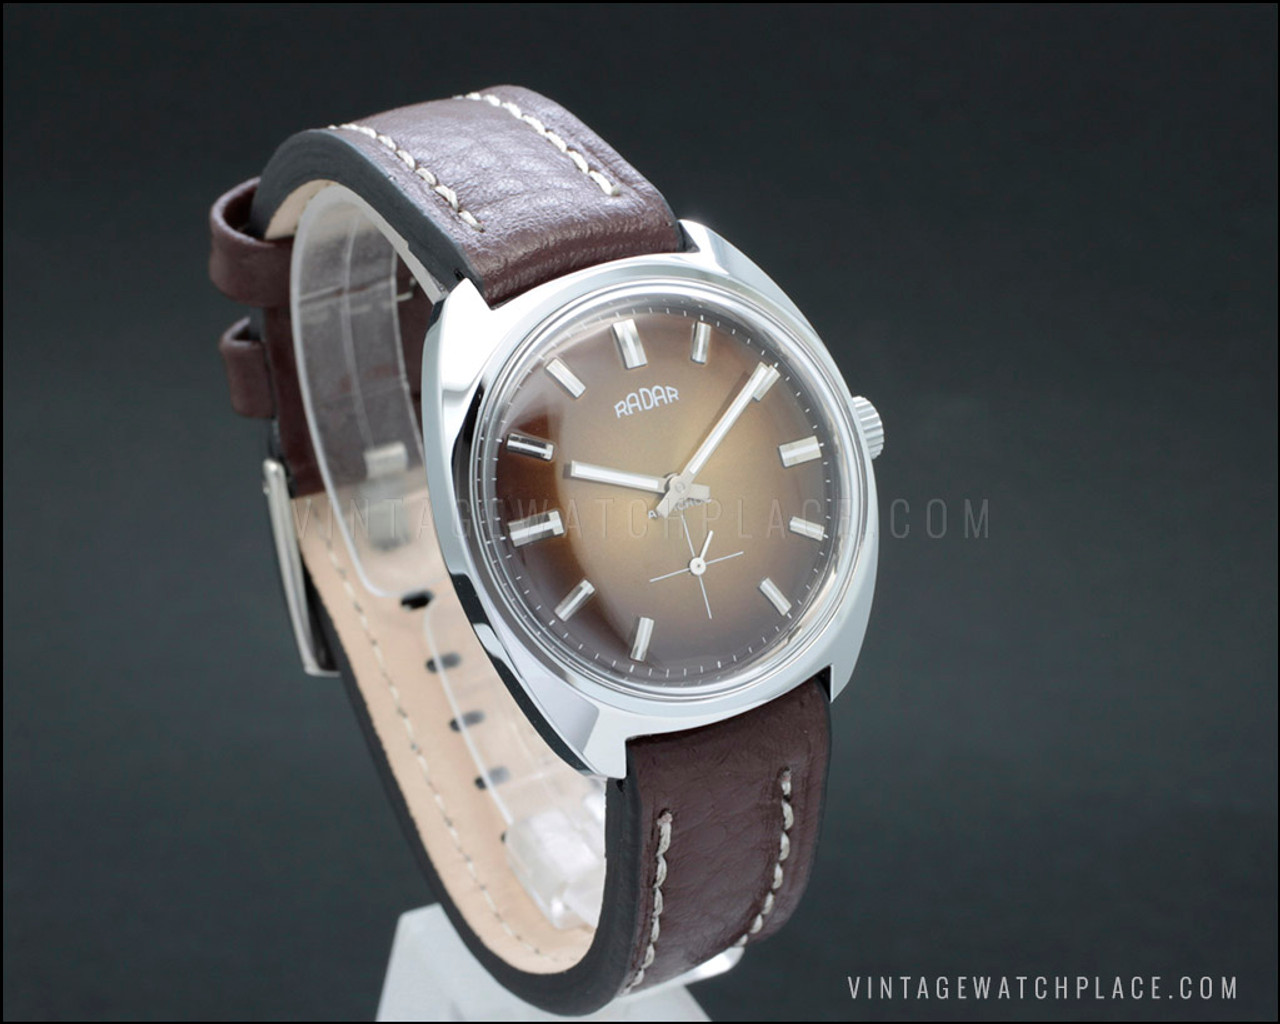 New Old Stock Radar mechanical vintage watch, brown dial with no Arabic ...